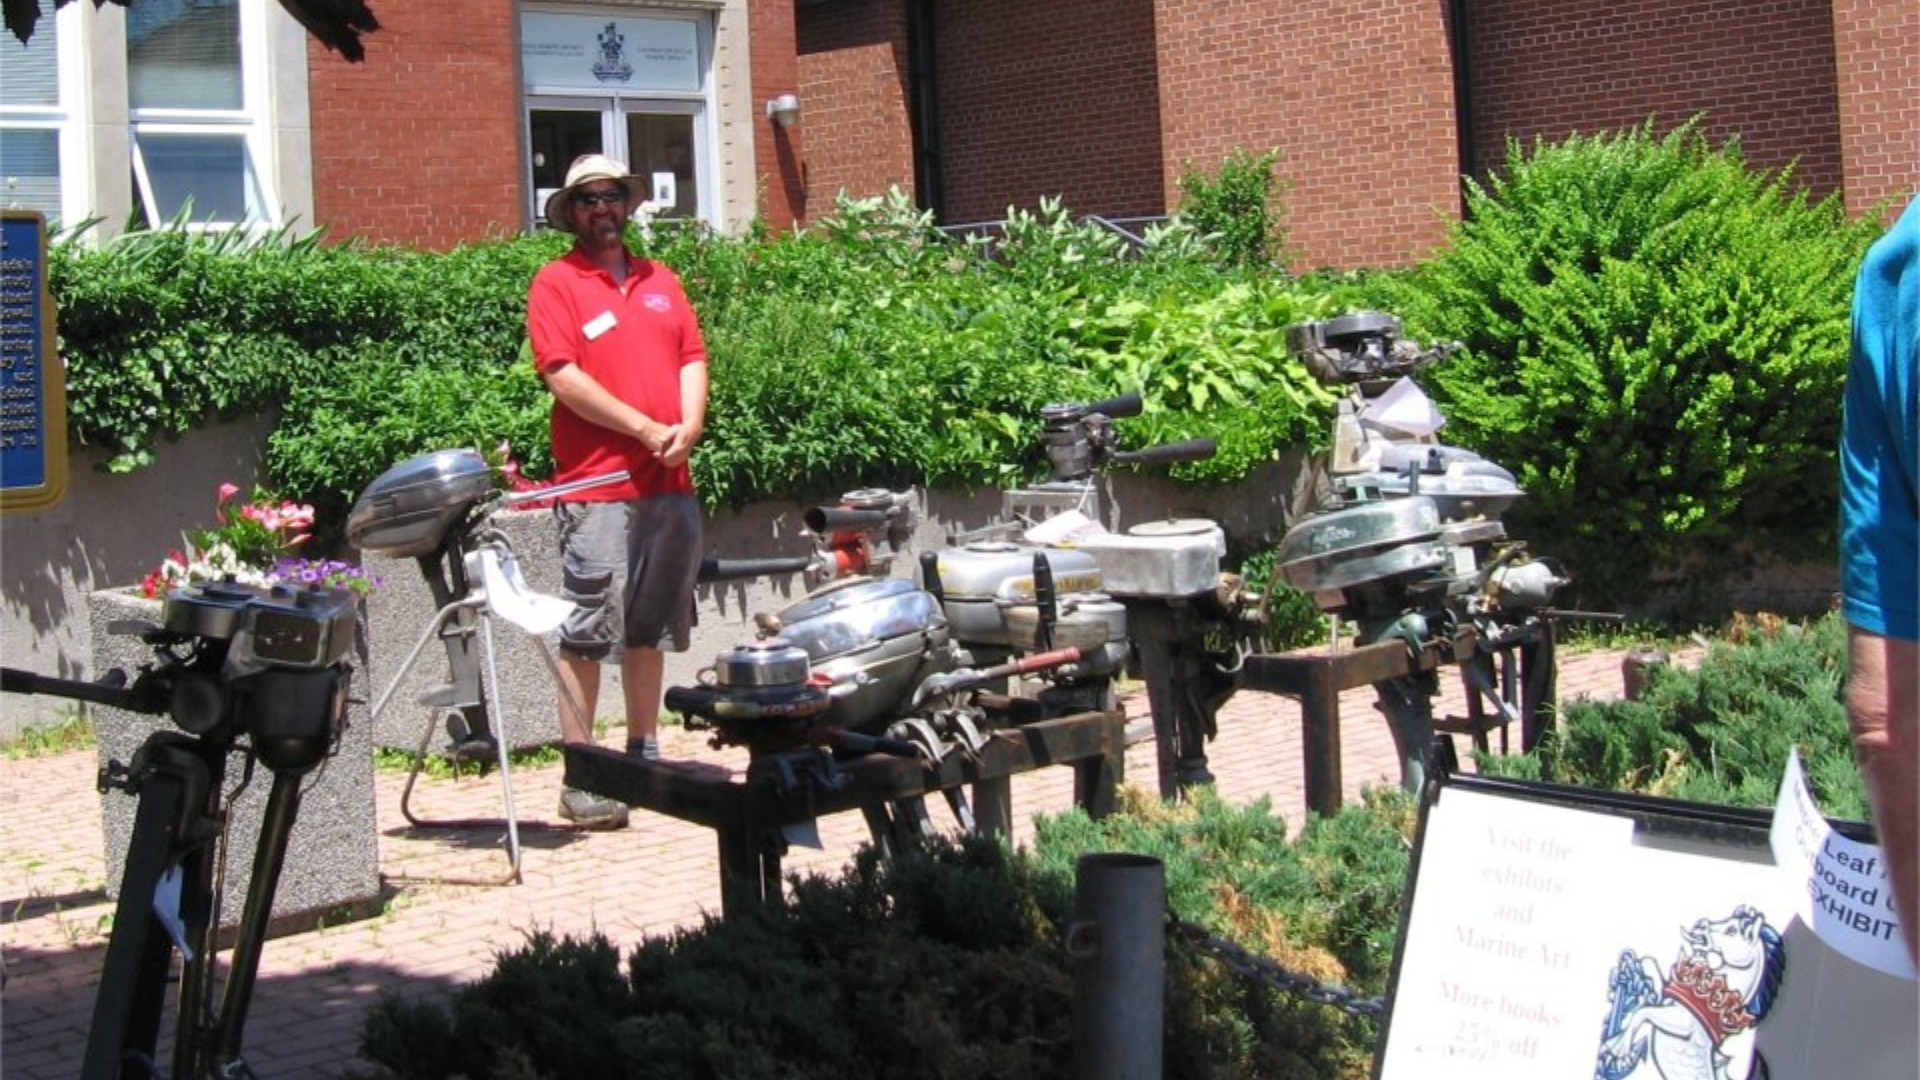 Antique outboard motors on display in front of the Naval Marine Archives